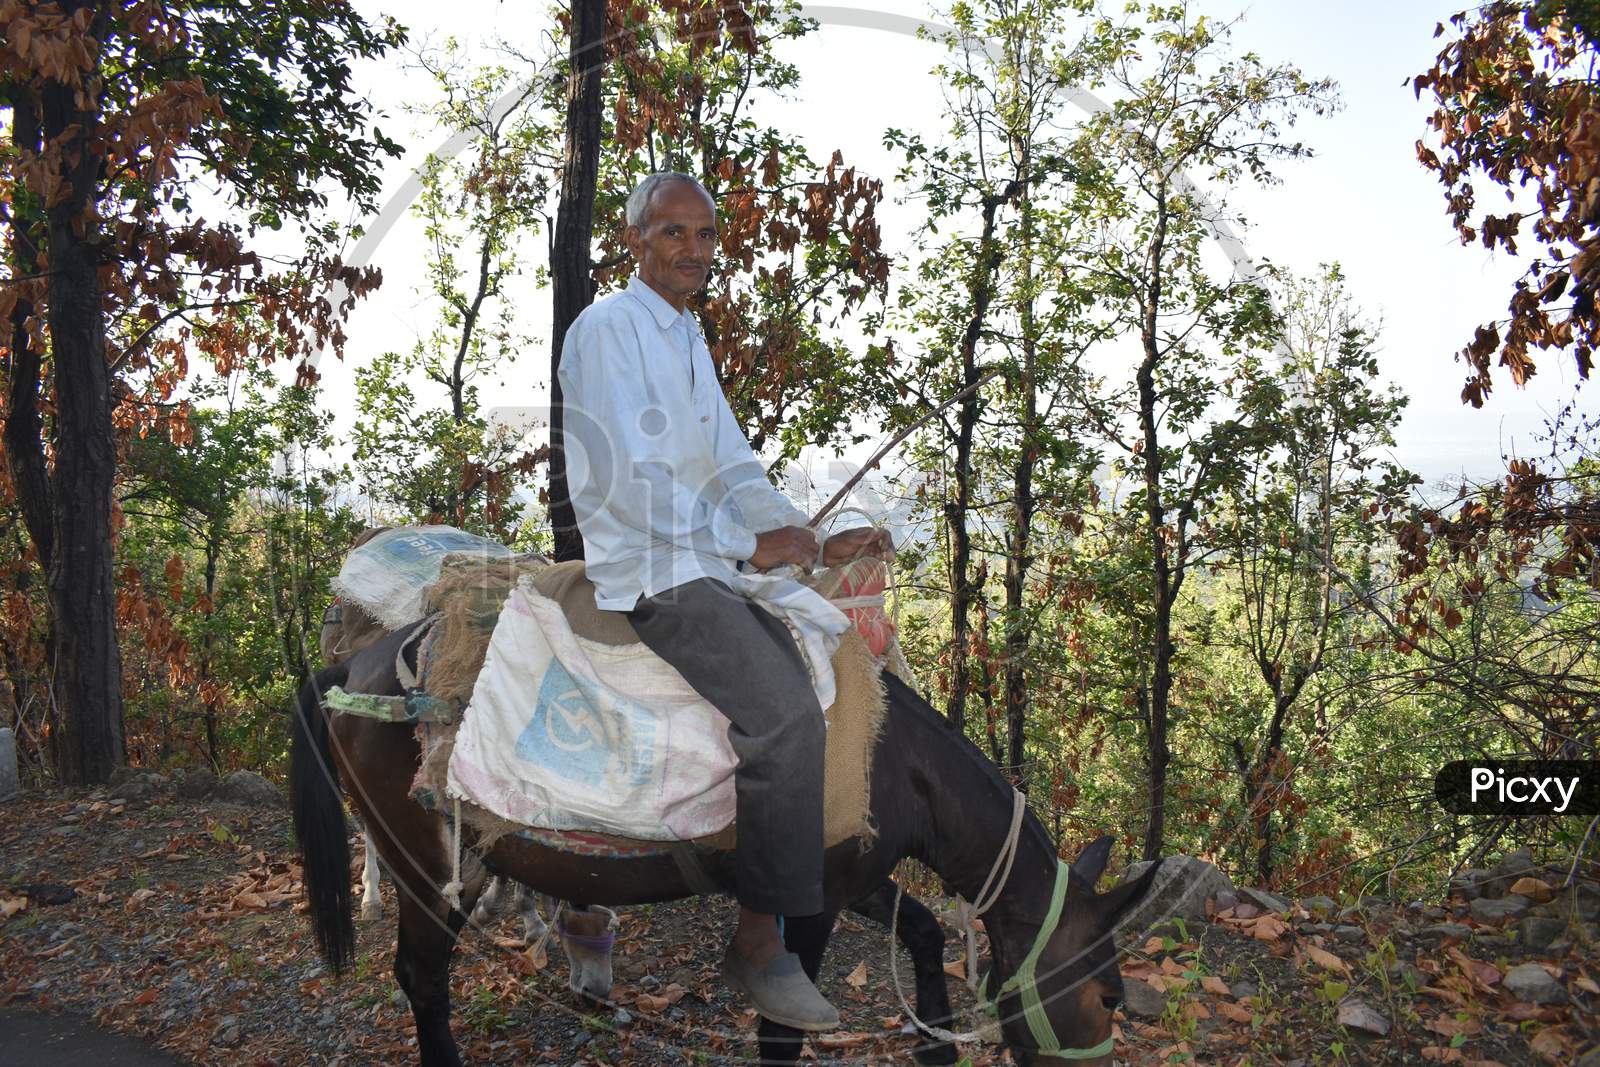 A Local Person On A Horse In The Month Of June 2019 At Dehradun, India.